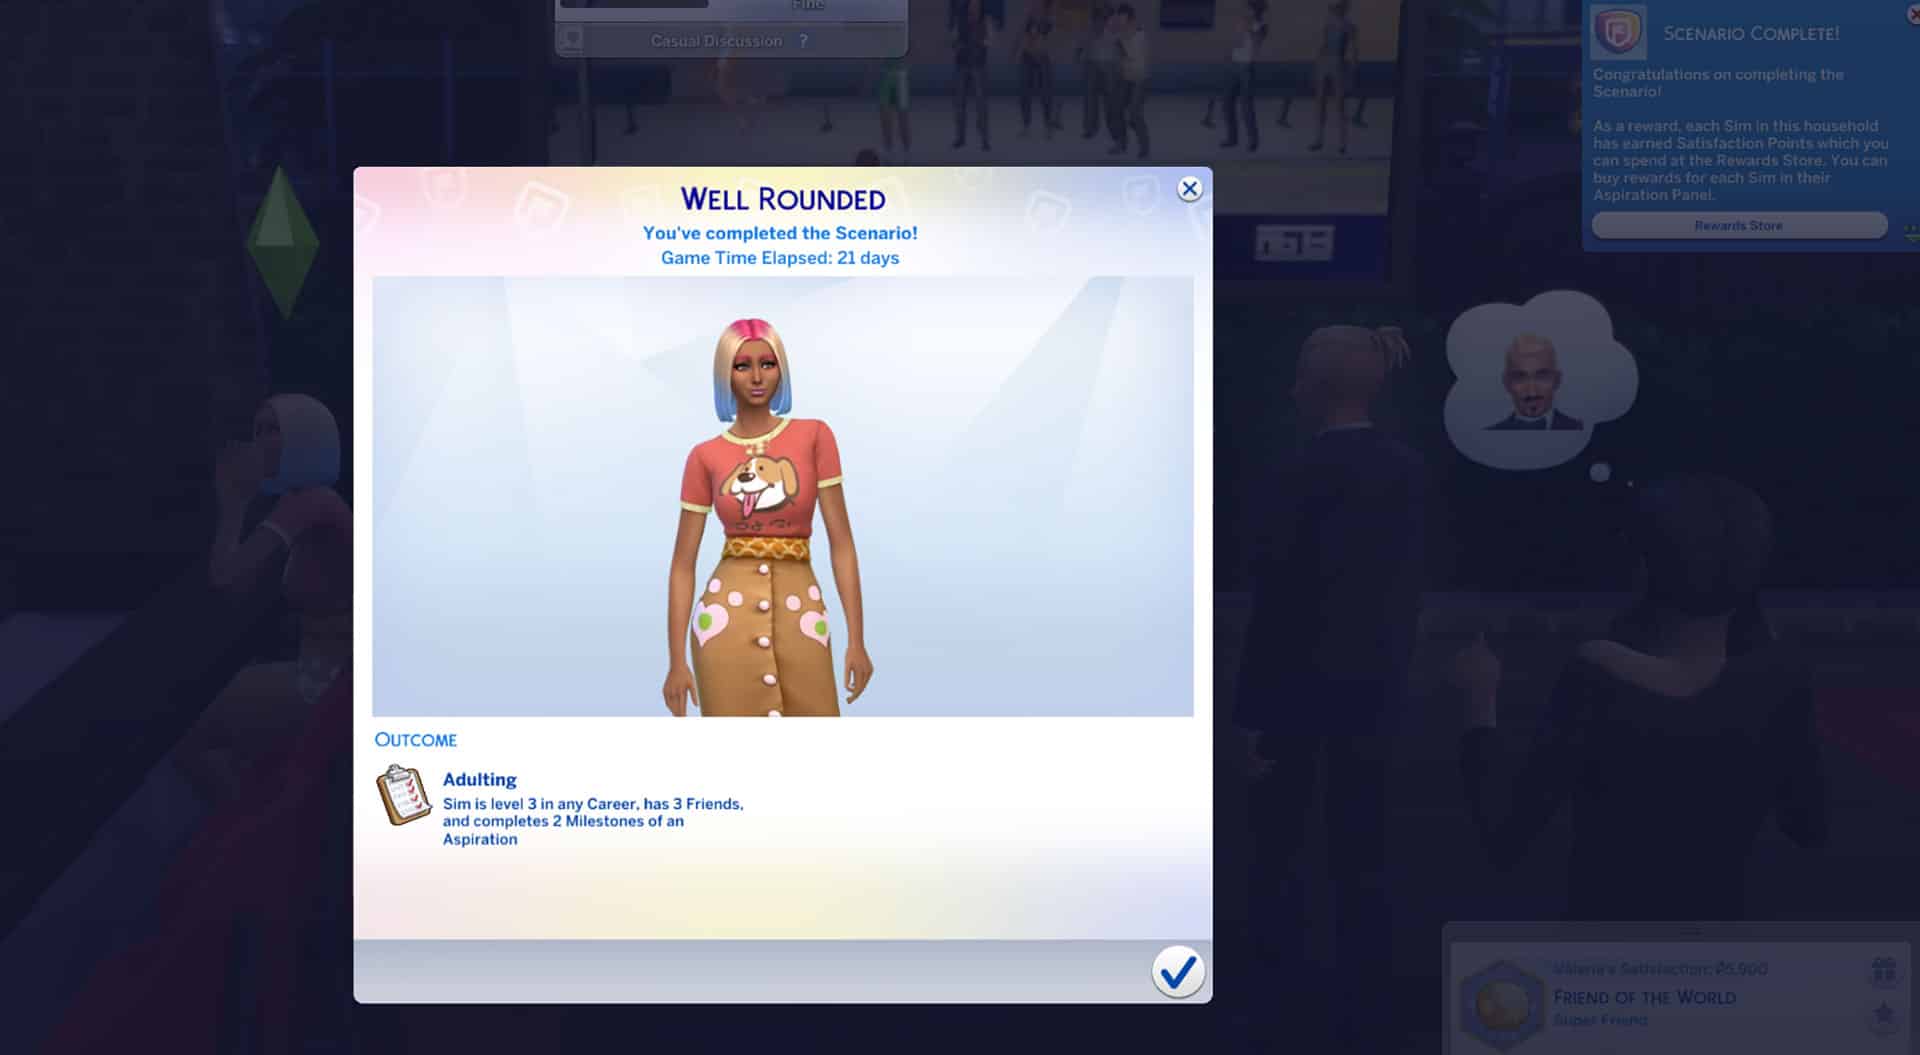 the sims 4 completing the well rounded scenario